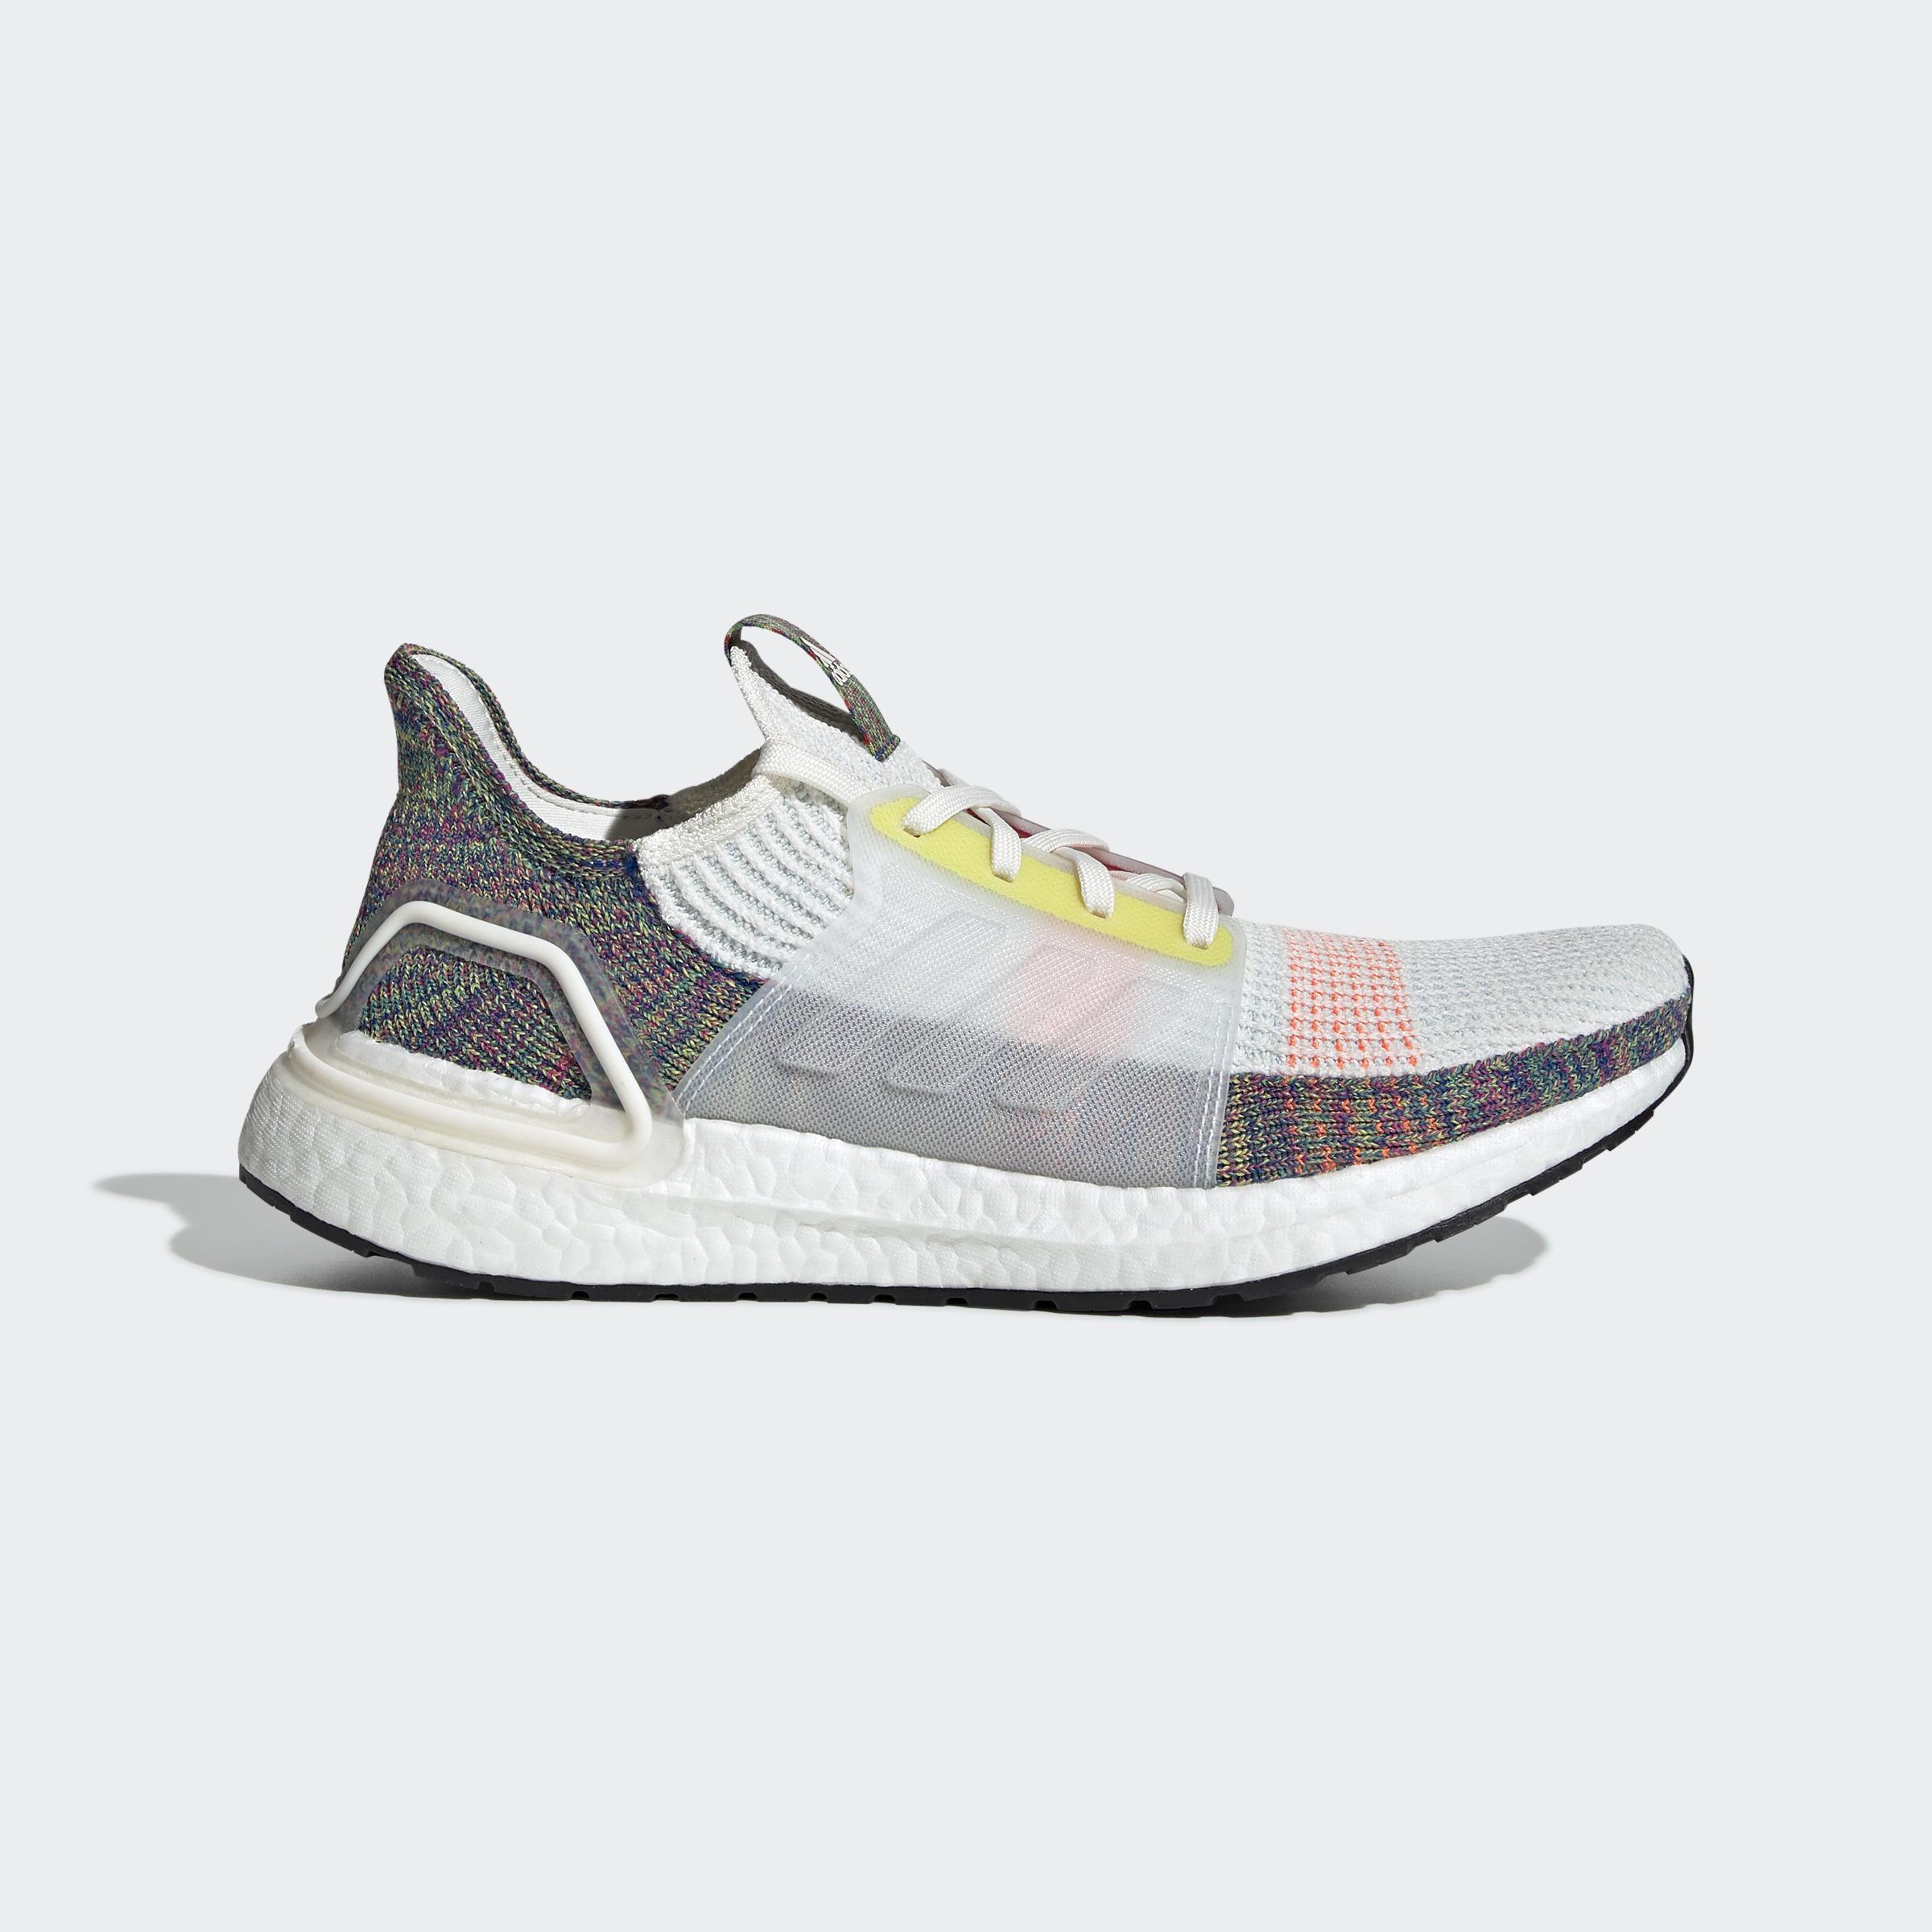 adidas Ultraboost 19 Pride Shoes in 